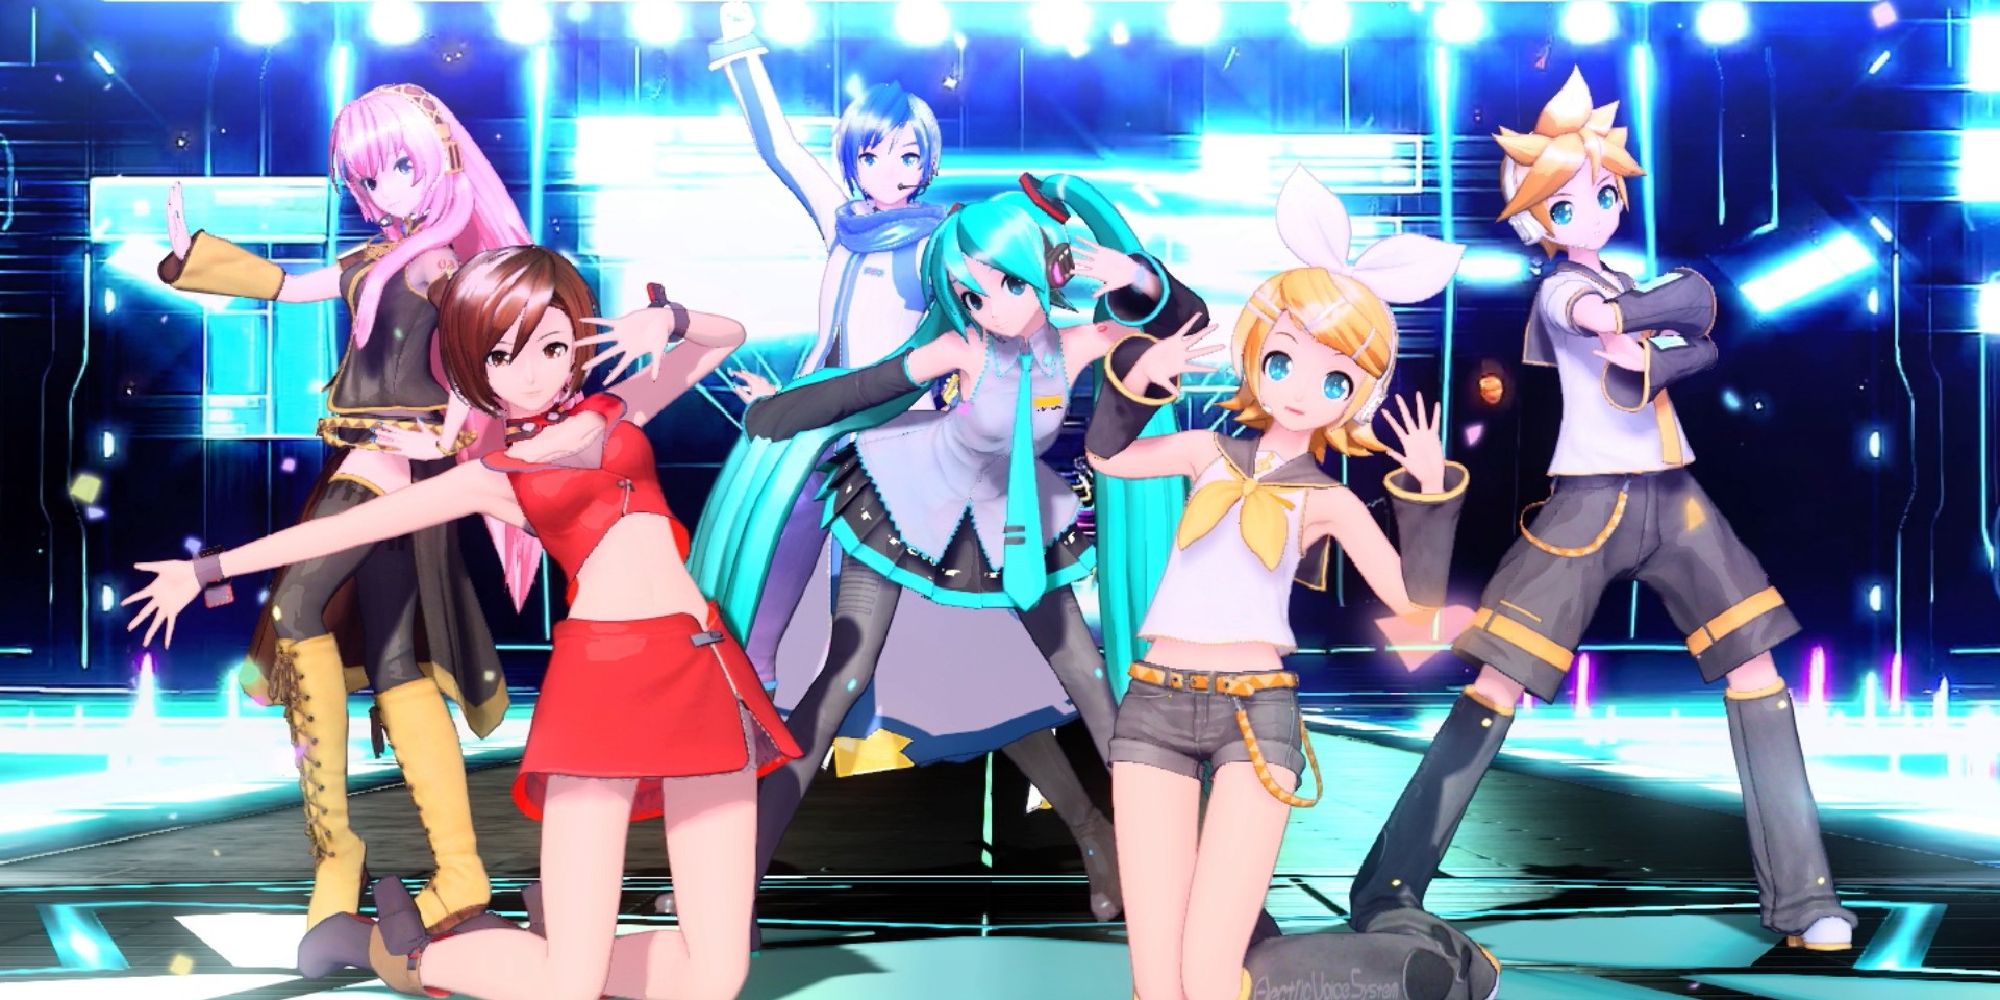 Rin Len Miku Luka Meiko and Kaito in Decorator by kz in Project Diva Megamix